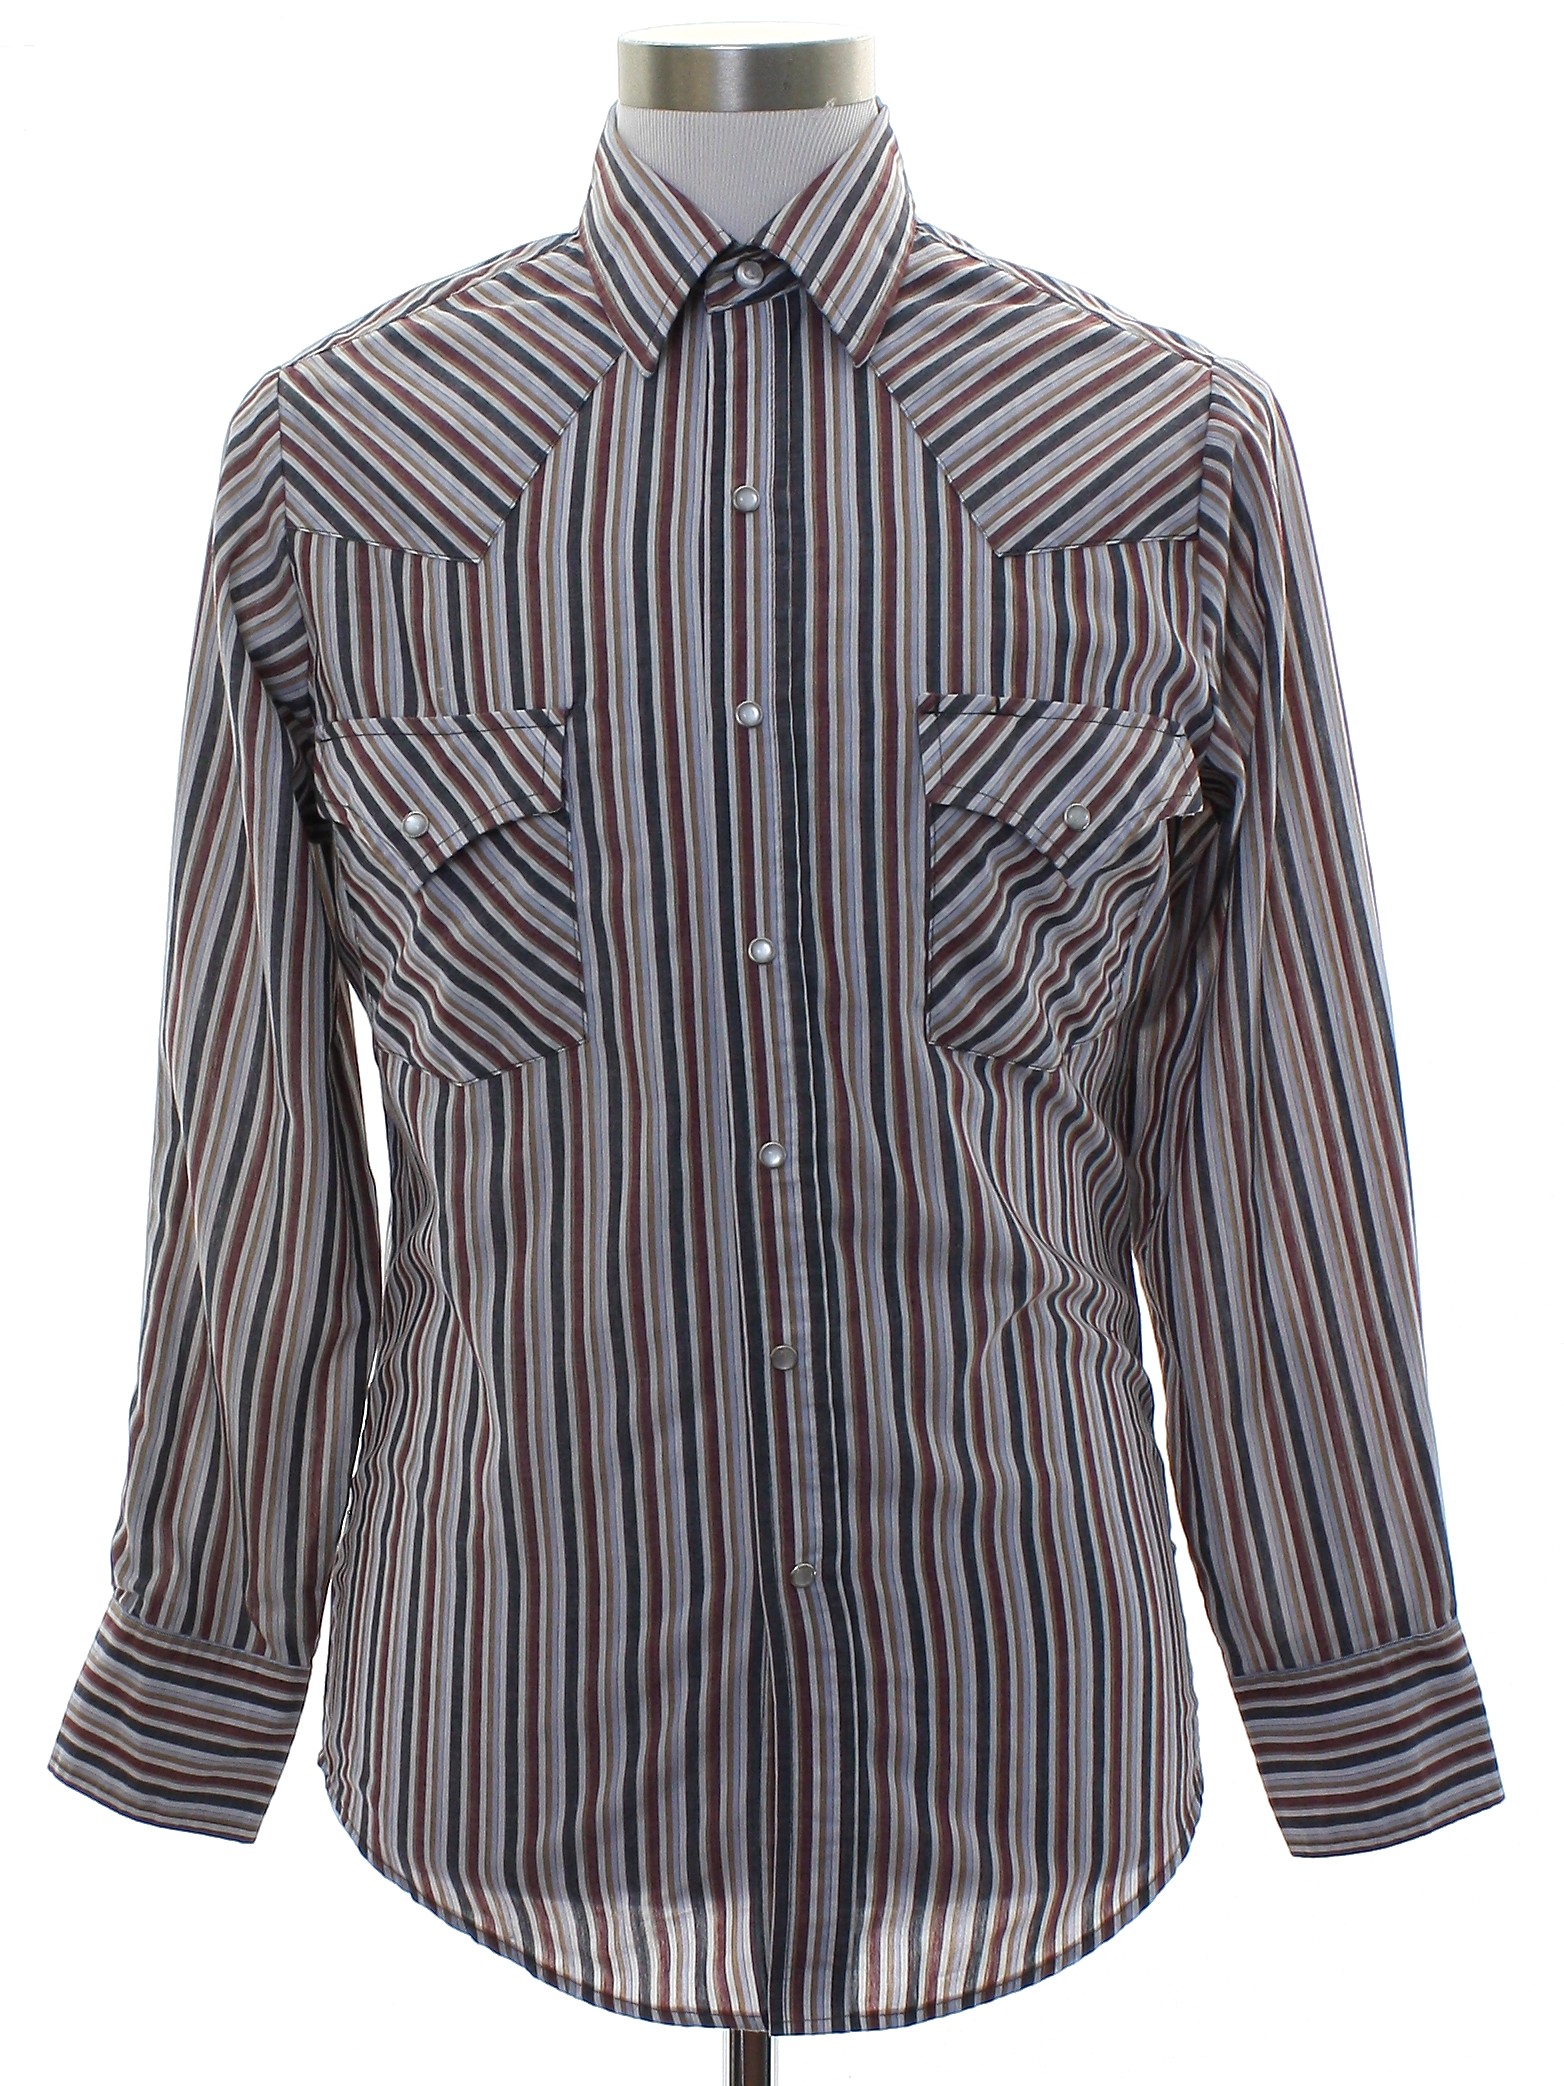 Western Shirt: 90s -Ely Cattleman- Mens white, striped polyester cotton ...